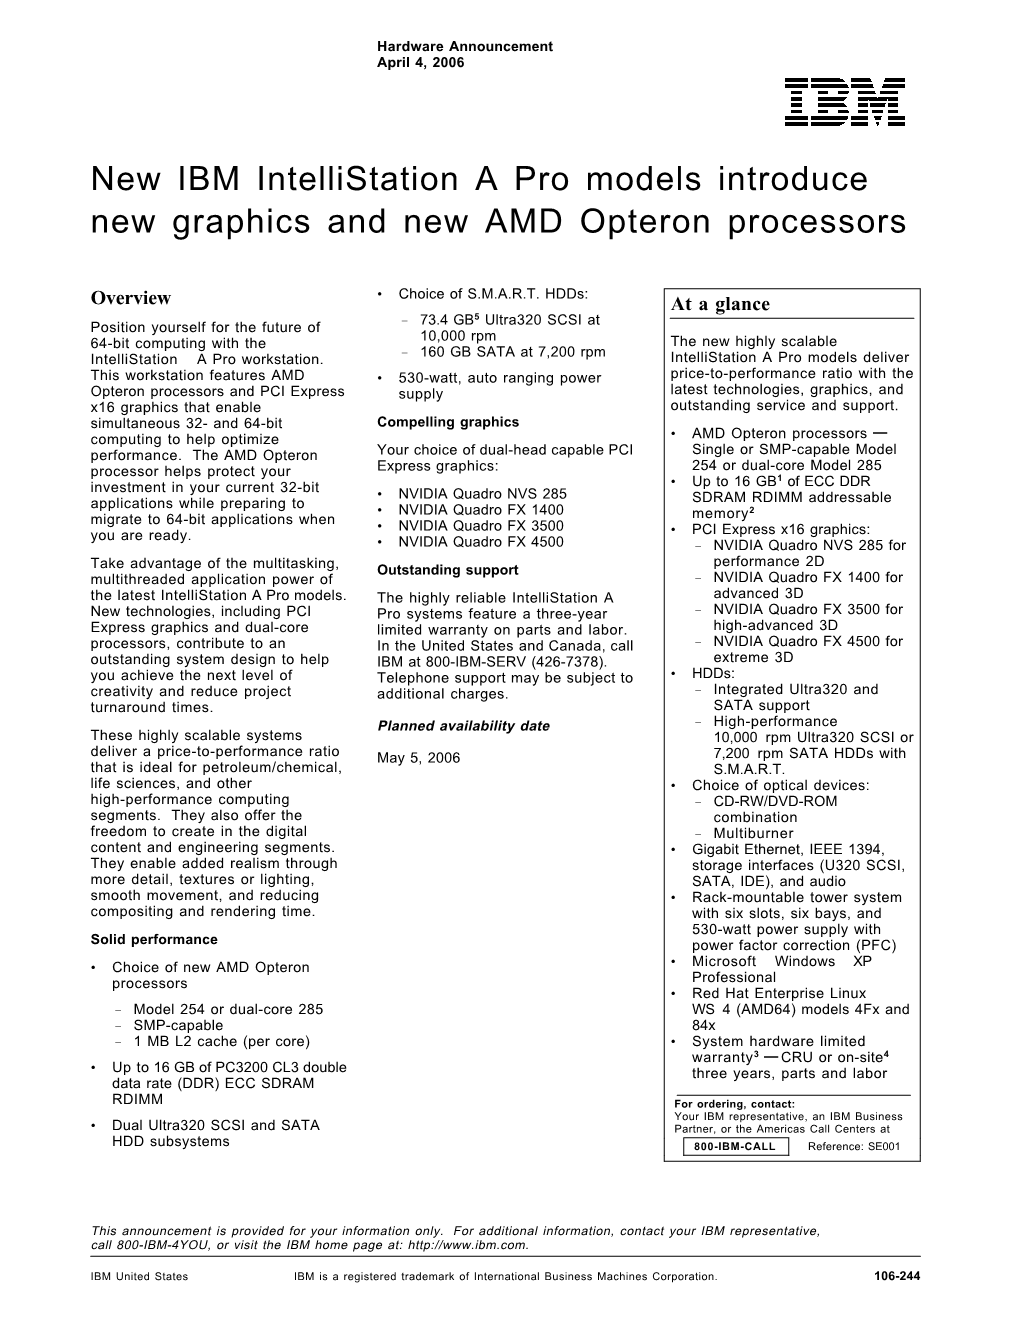 New IBM Intellistation a Pro Models Introduce New Graphics and New AMD Opteron Processors